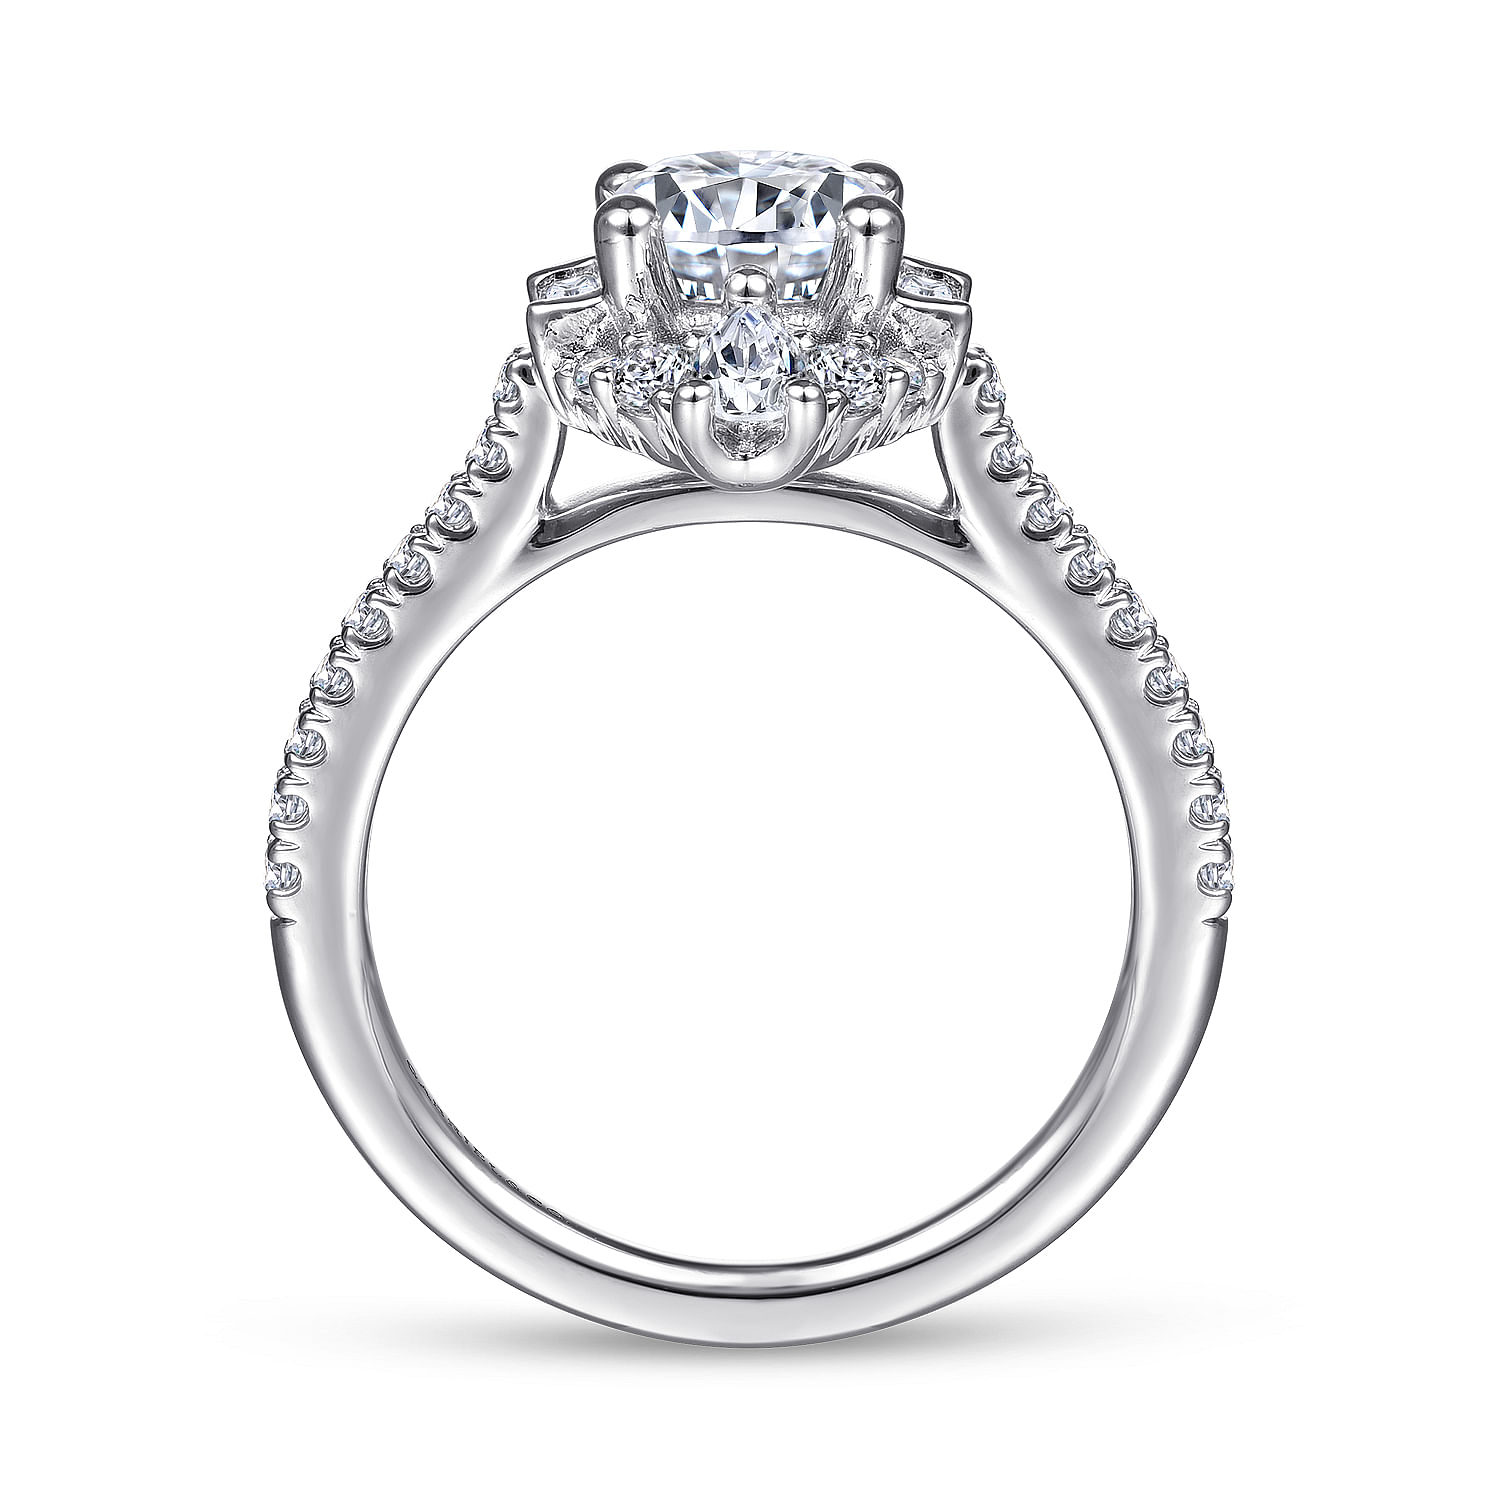 Round Engagement Rings - Gabriel & Co.